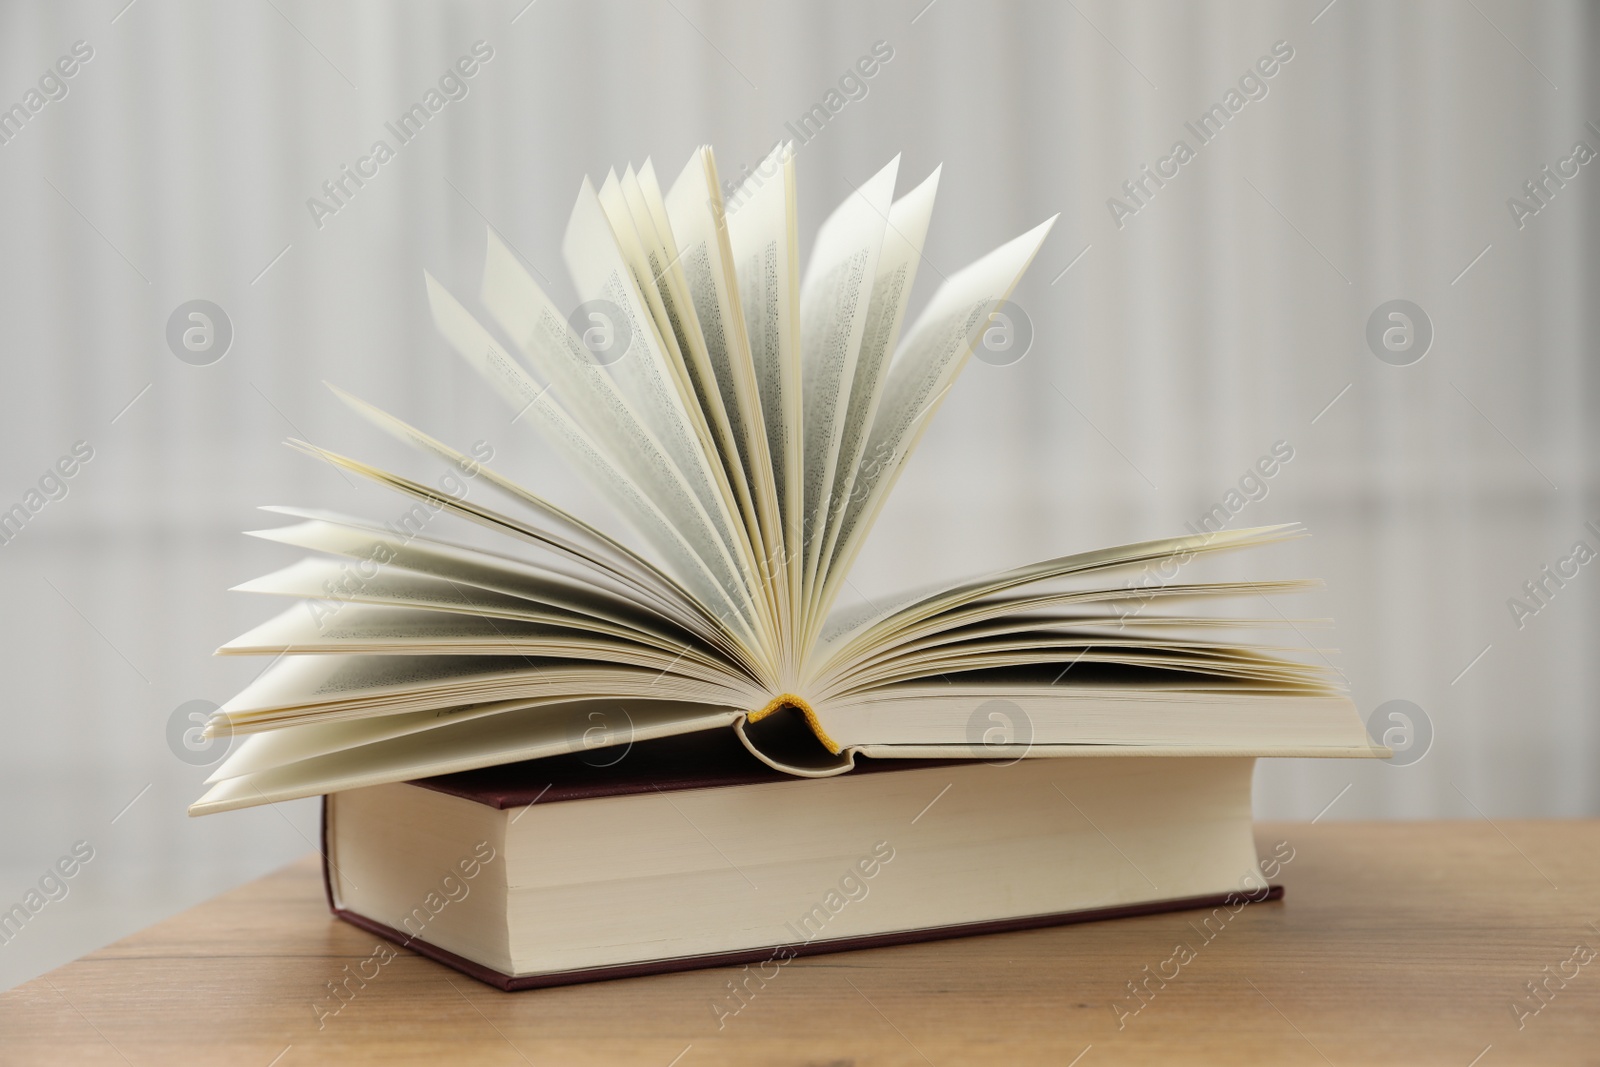 Photo of Different hardcover books on wooden table indoors